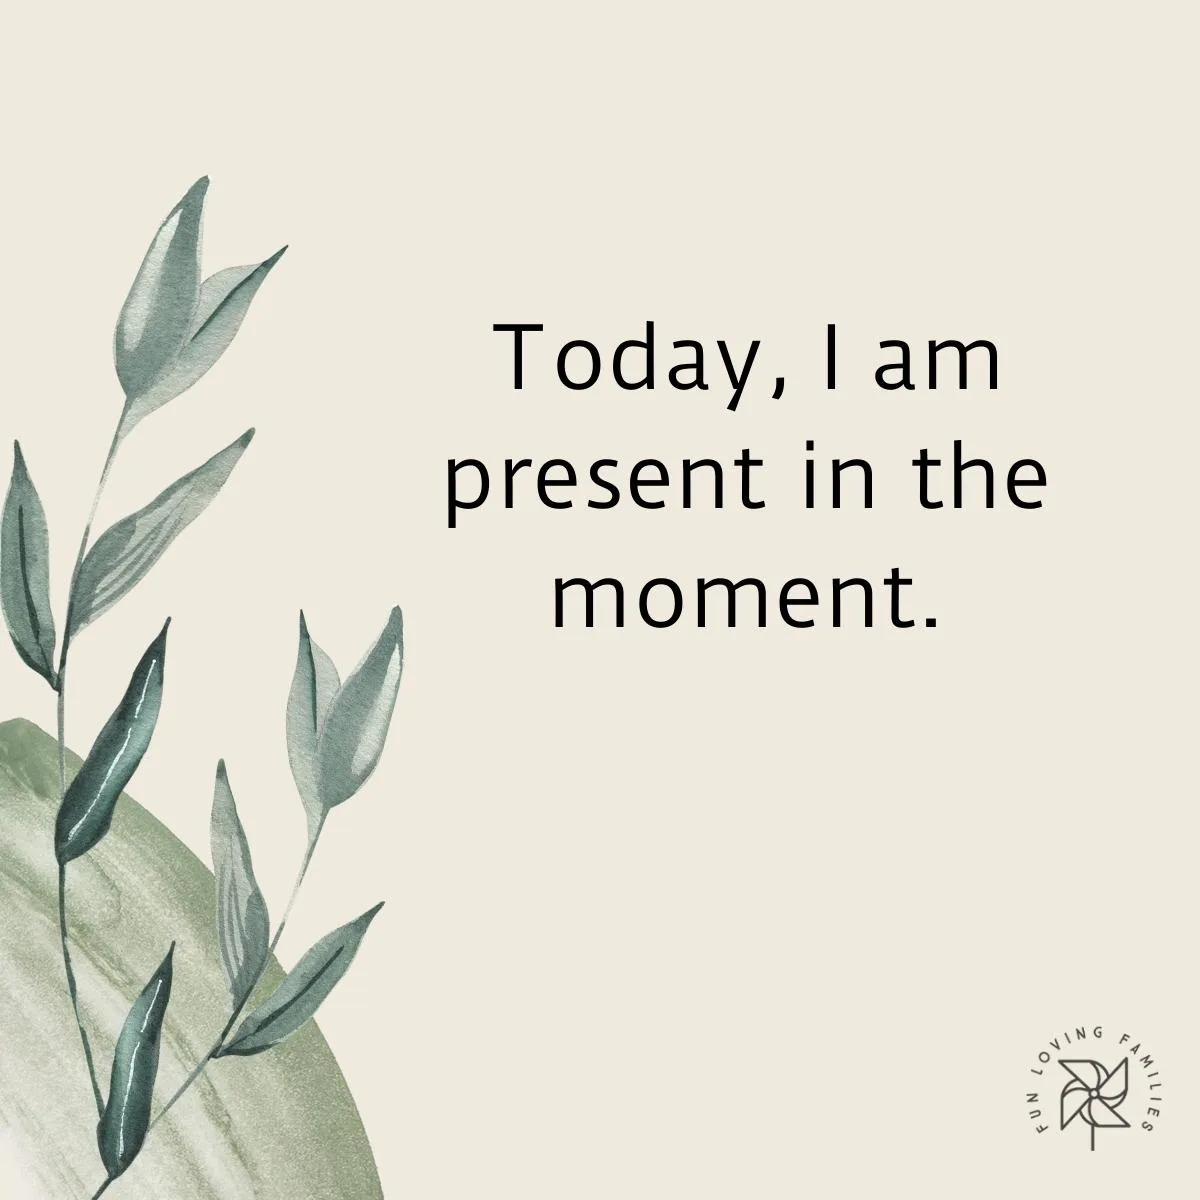 Today, I am present in the moment affirmation